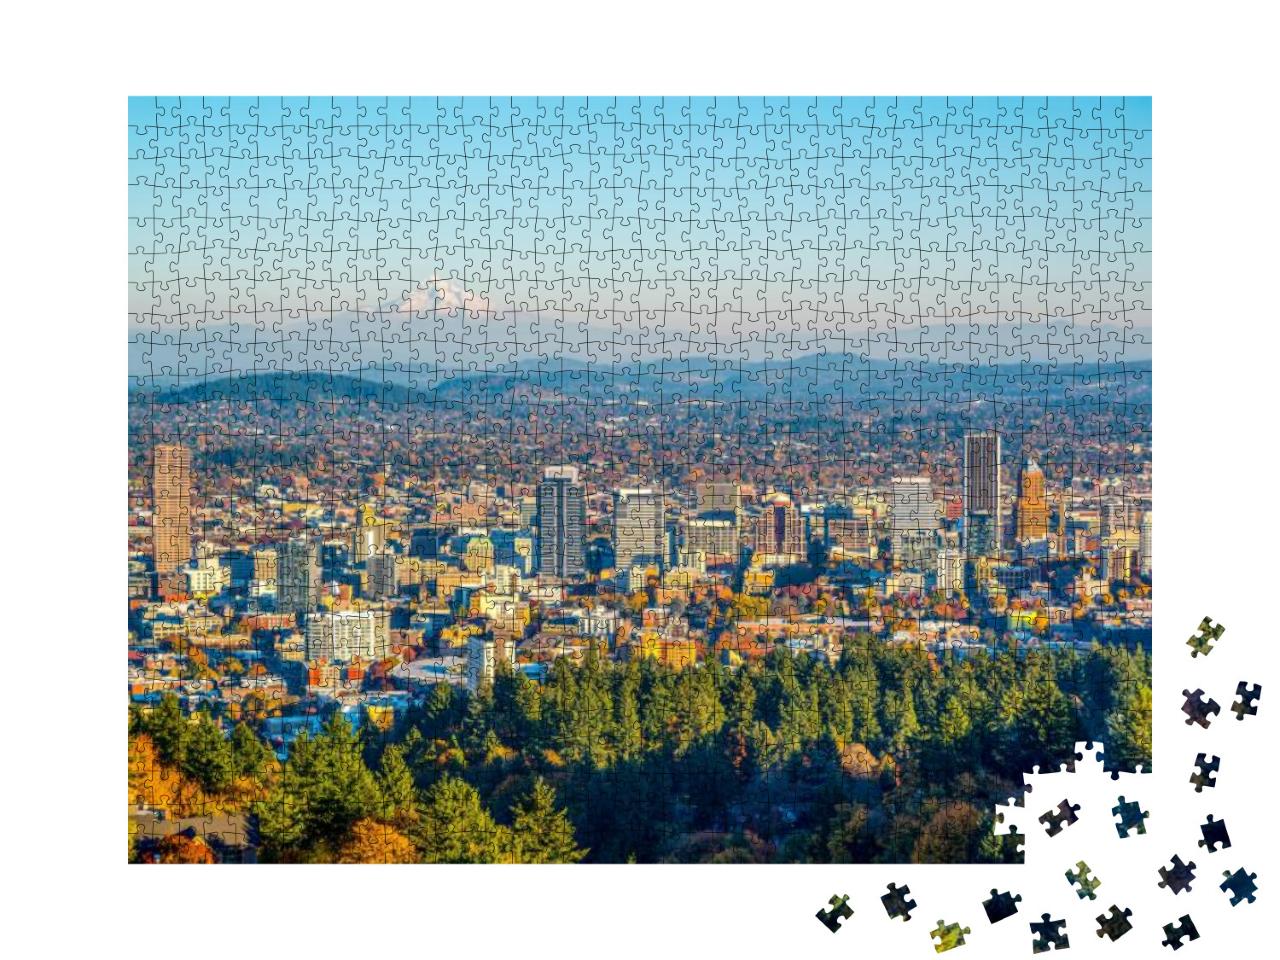 City of Portland Oregon & Mount Hood in Autumn, Oregon-Us... Jigsaw Puzzle with 1000 pieces